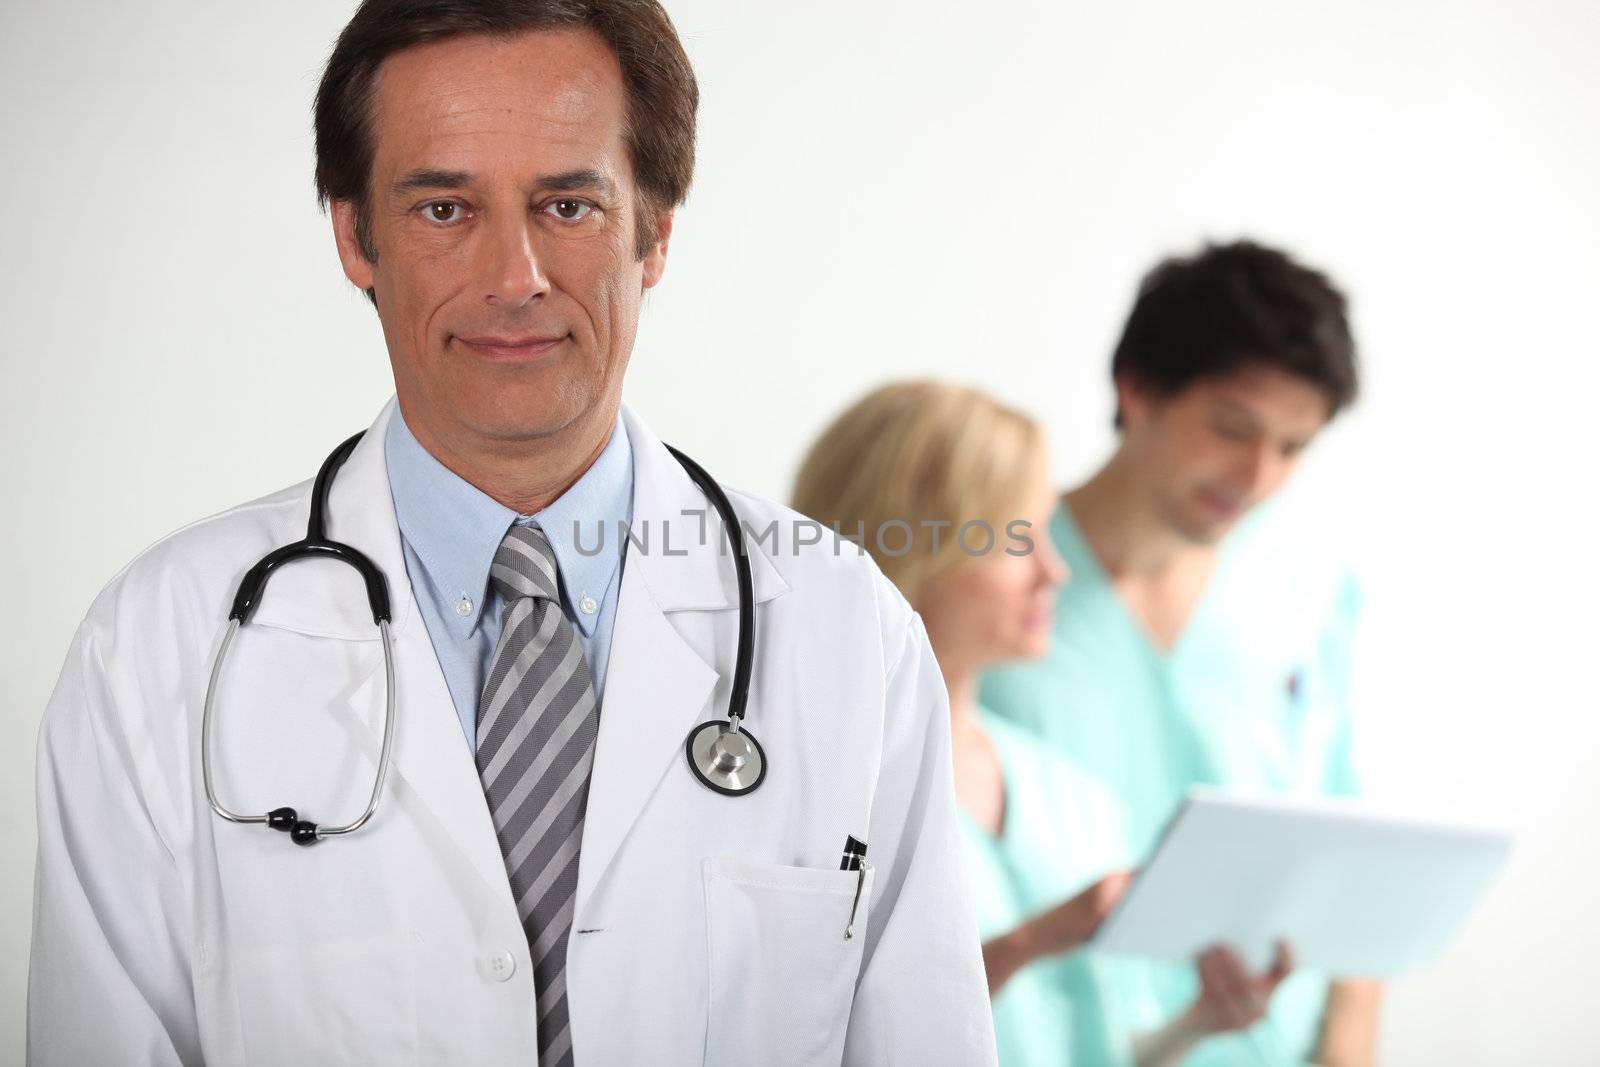 Doctor stood in front of colleagues by phovoir